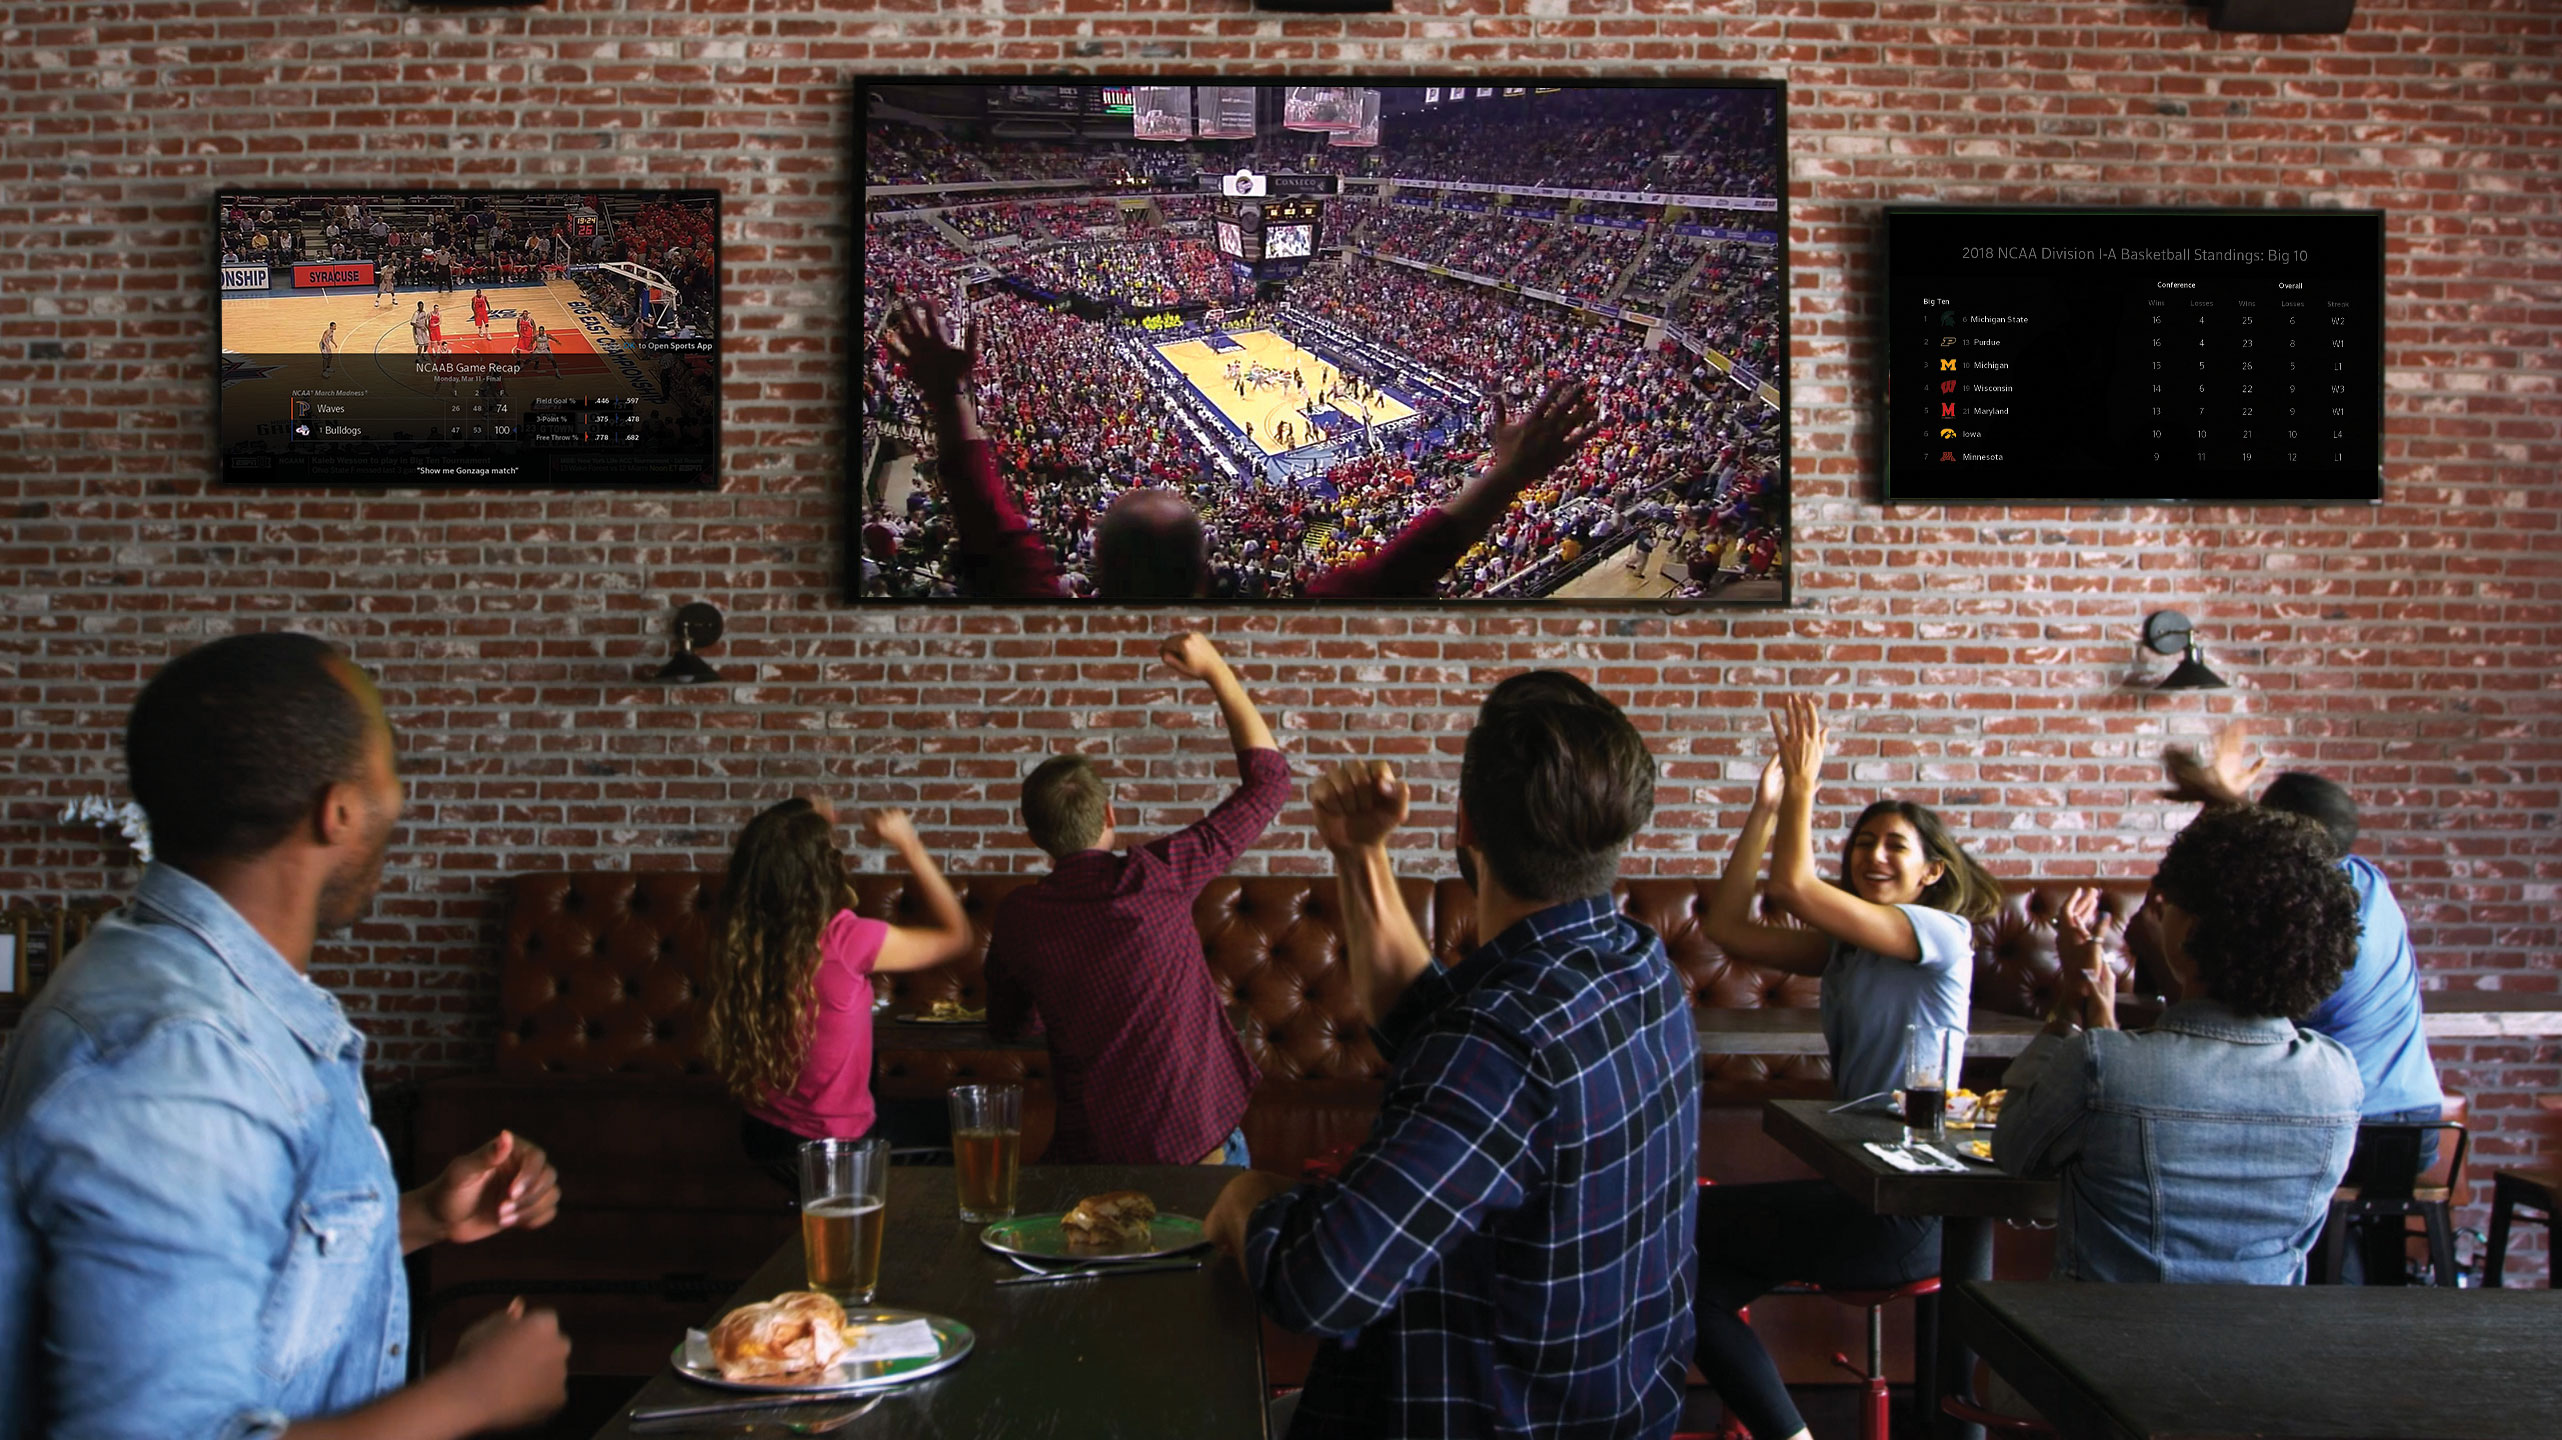 Fans cheer at a bar as they watch a basketball game.